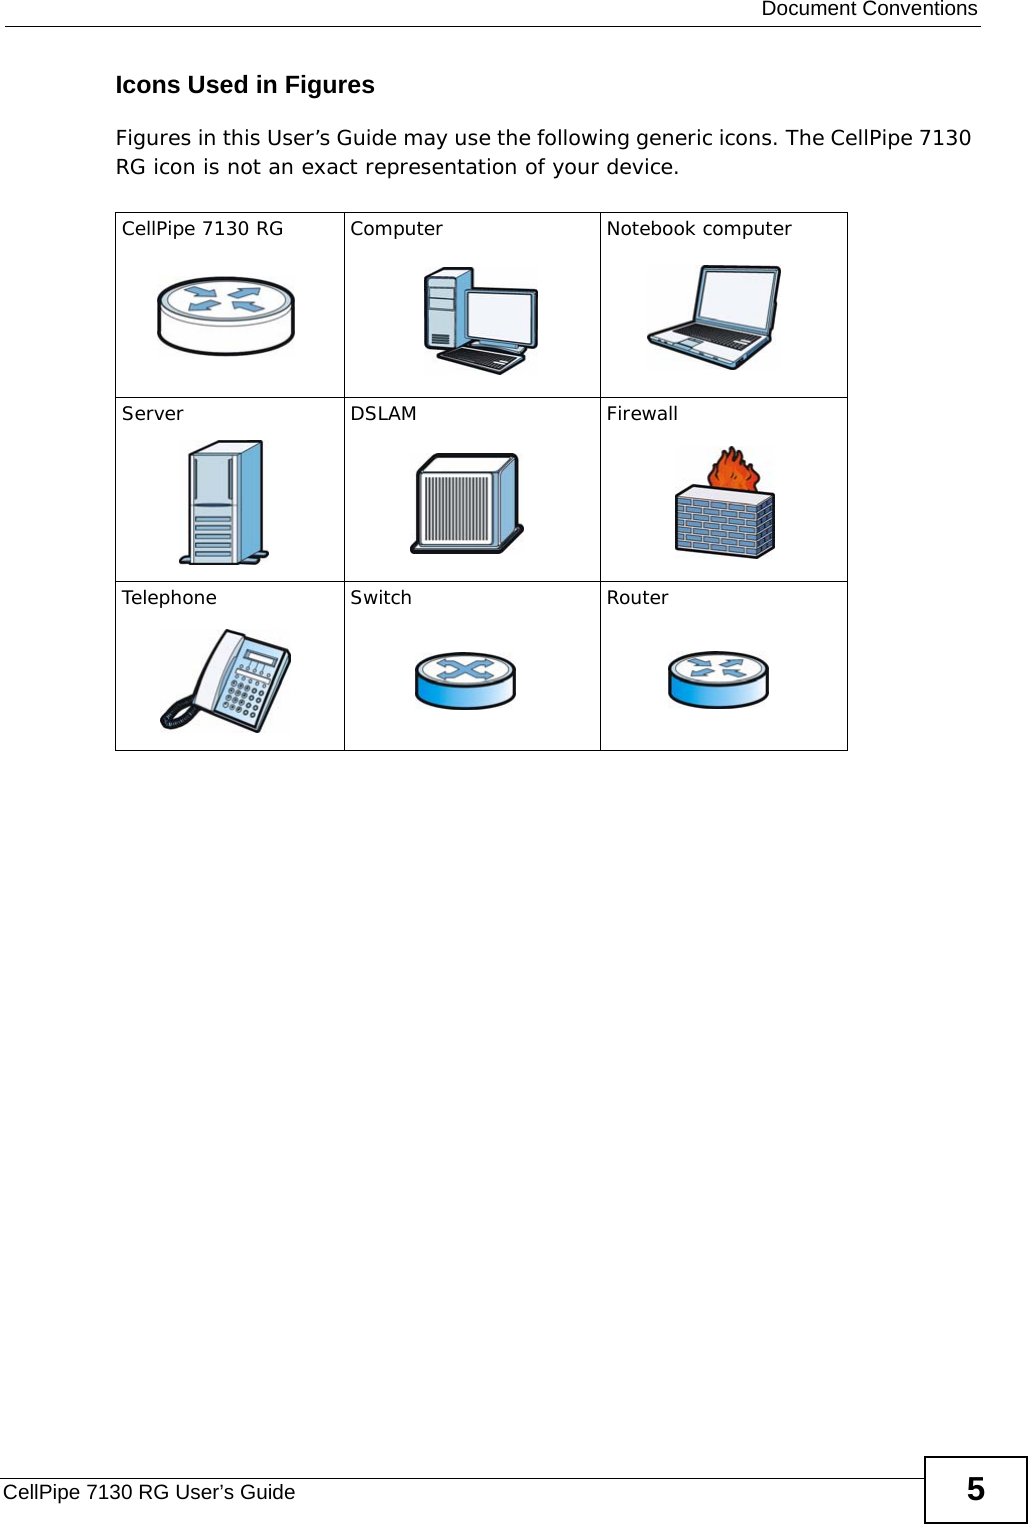  Document ConventionsCellPipe 7130 RG User’s Guide 5Icons Used in FiguresFigures in this User’s Guide may use the following generic icons. The CellPipe 7130 RG icon is not an exact representation of your device.CellPipe 7130 RG Computer Notebook computerServer DSLAM FirewallTelephone Switch Router